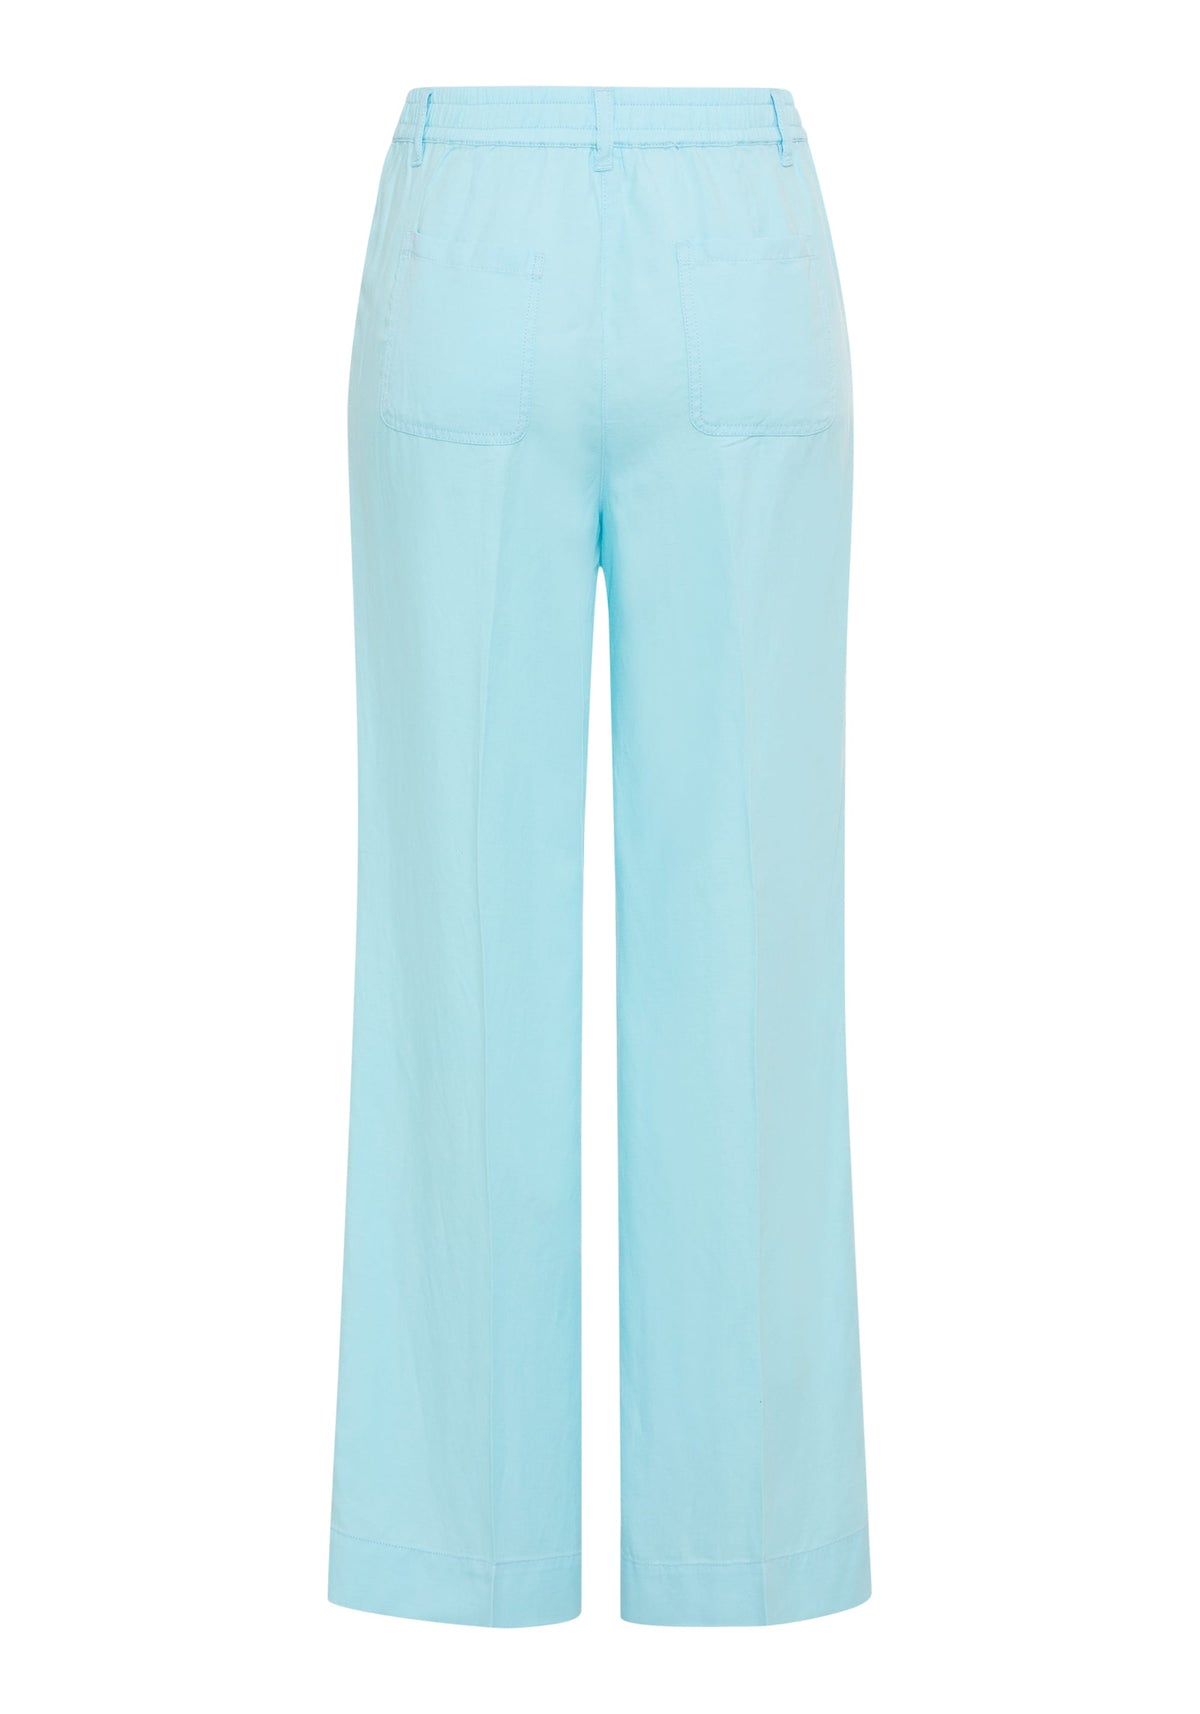 Anna Fit Wide Leg Trouser containing TENCEL™ Lyocell